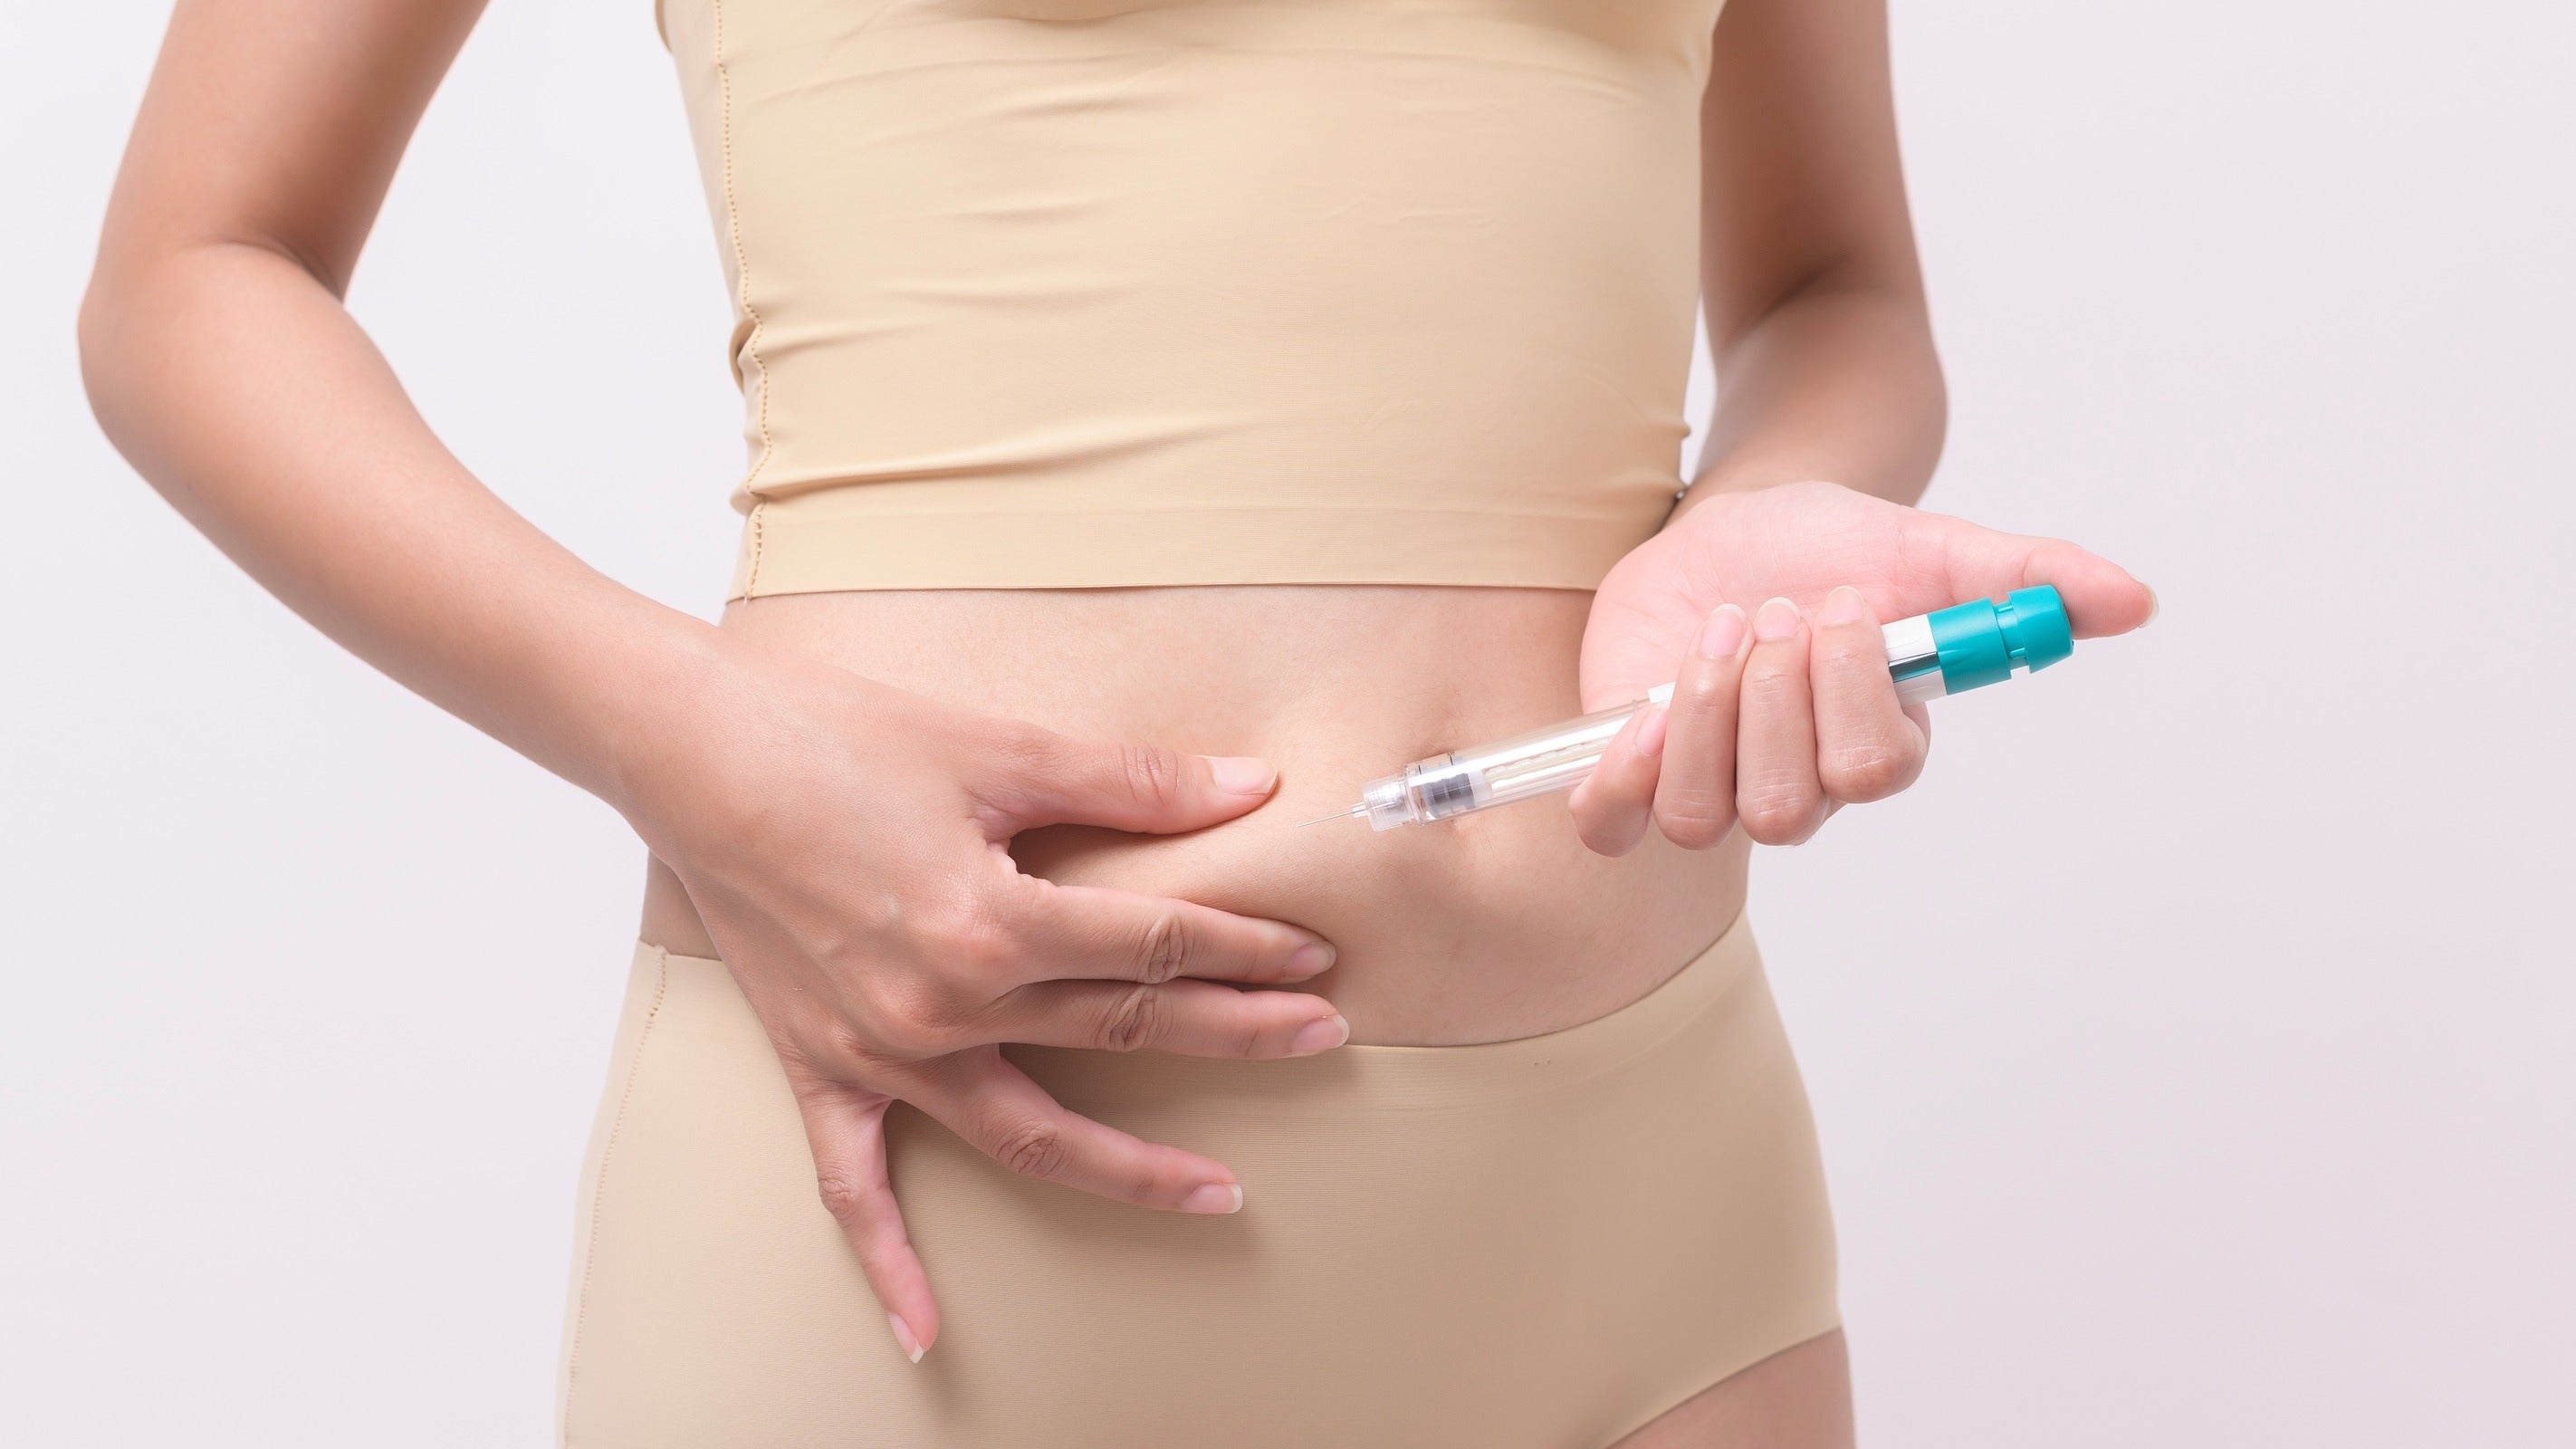 Ways to Make Progesterone Injections Less Painful